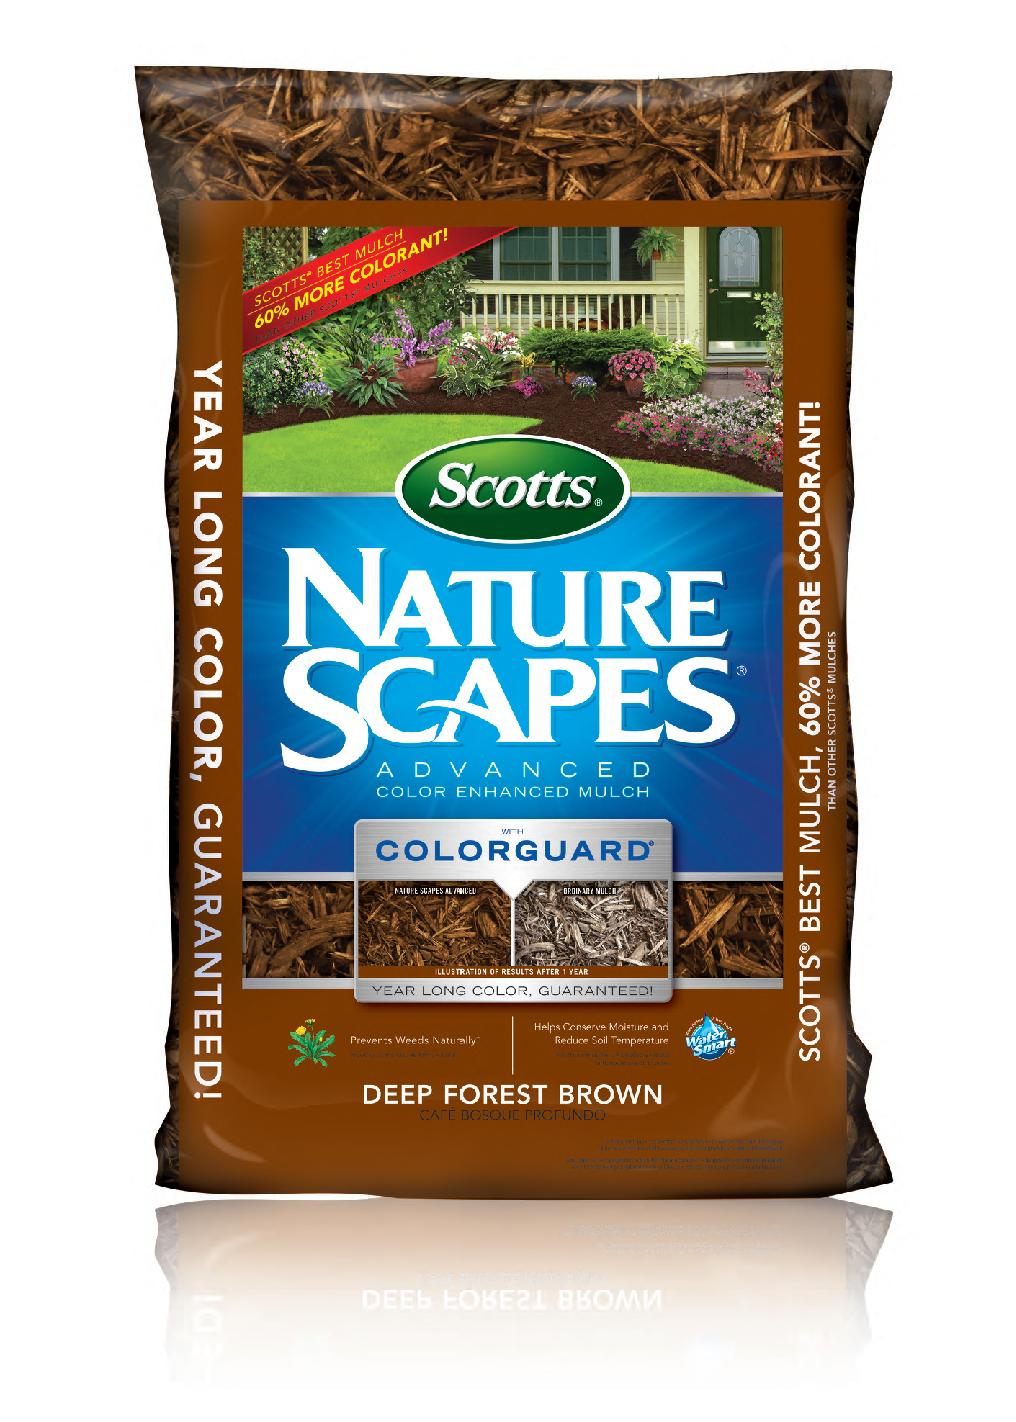 Image of Scotts Nature Scapes Natural Brown Mulch